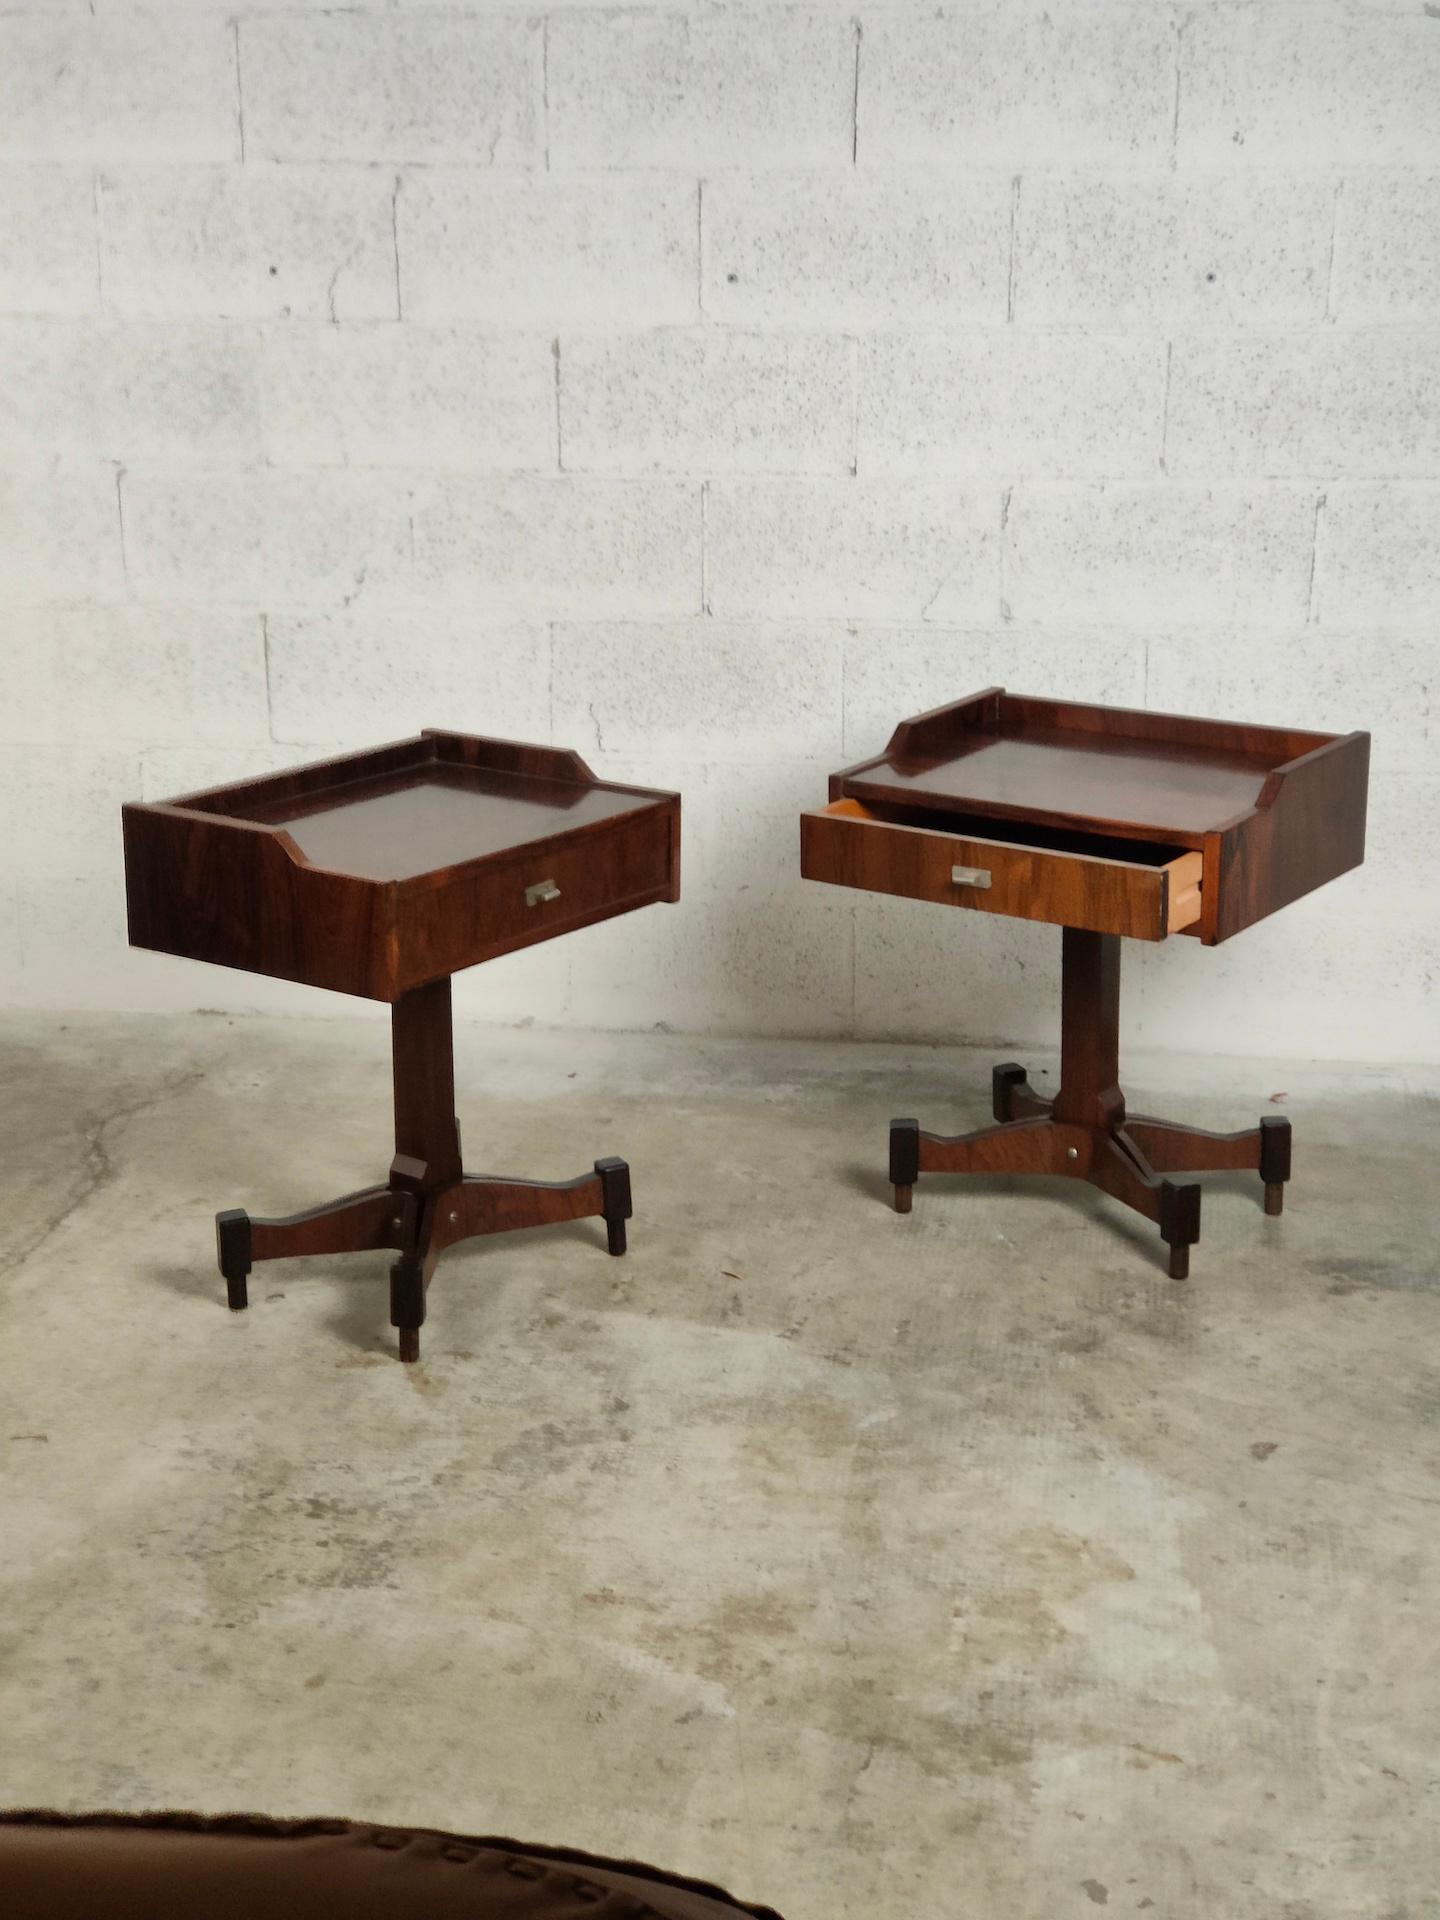 2 Wooden Nightstands Sc 50 Model by Carlo Salocchi for Sormani 60's, Italy 2